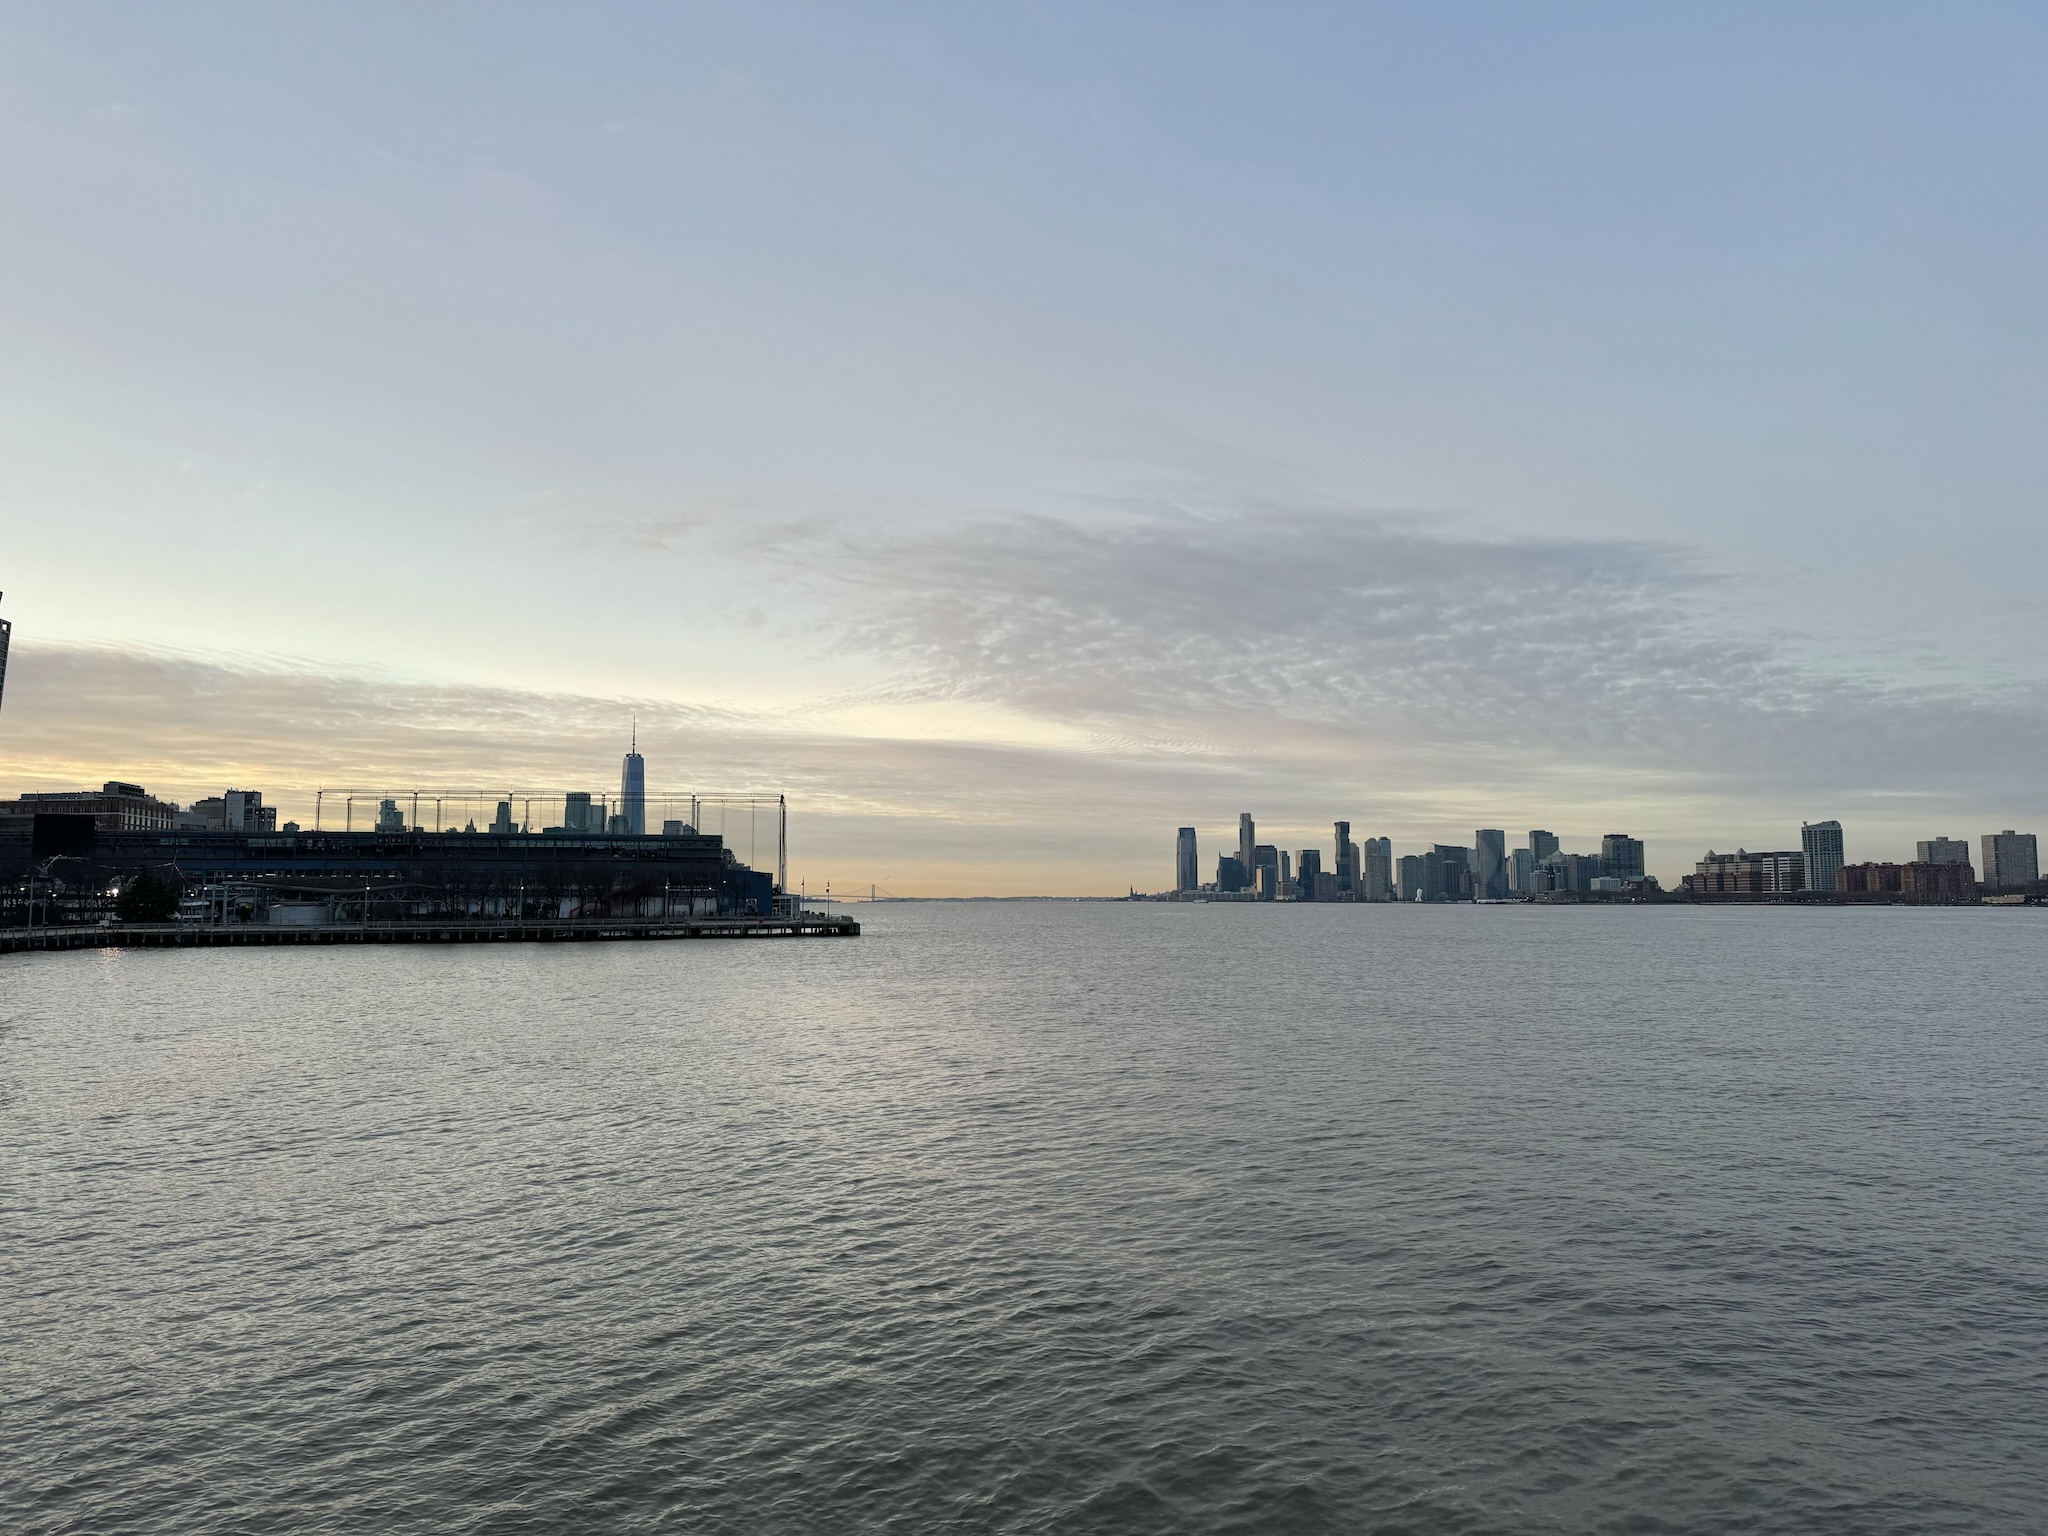 A view of the Hudson River from the West Side of Manhattan